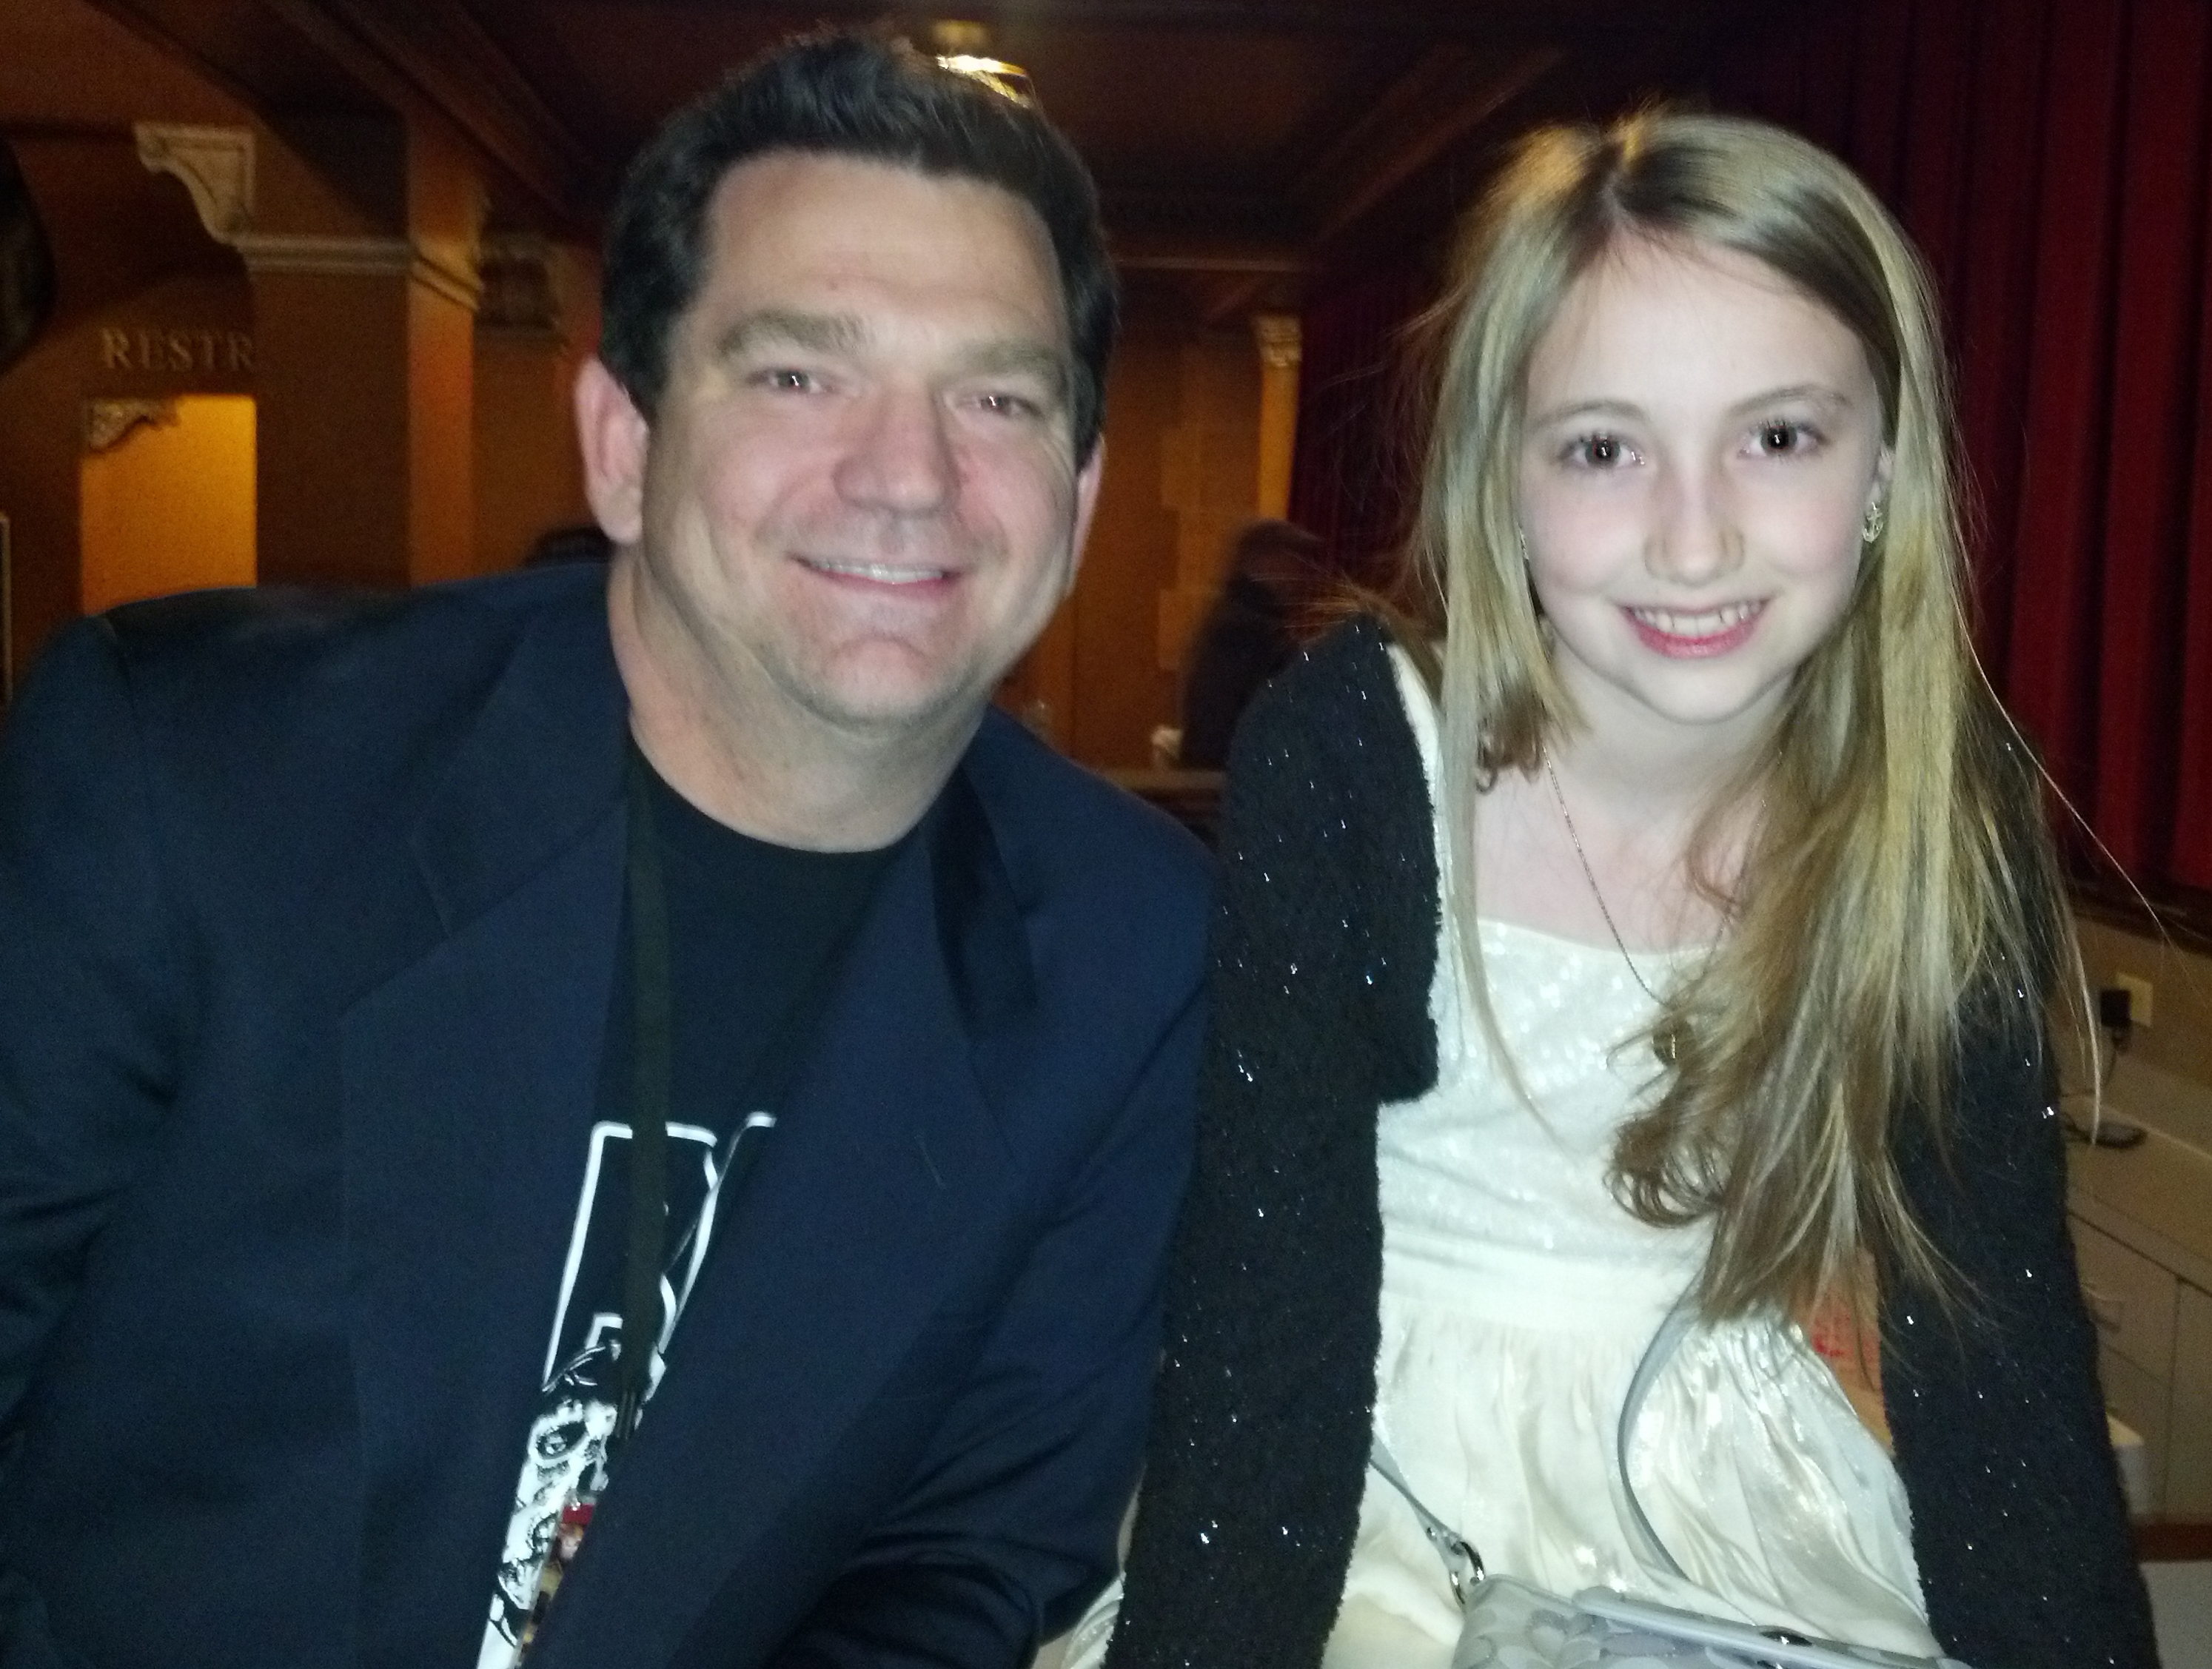 Kaelynn with Nick Nick Nicholson at the Lagniappe Film and Music Festival